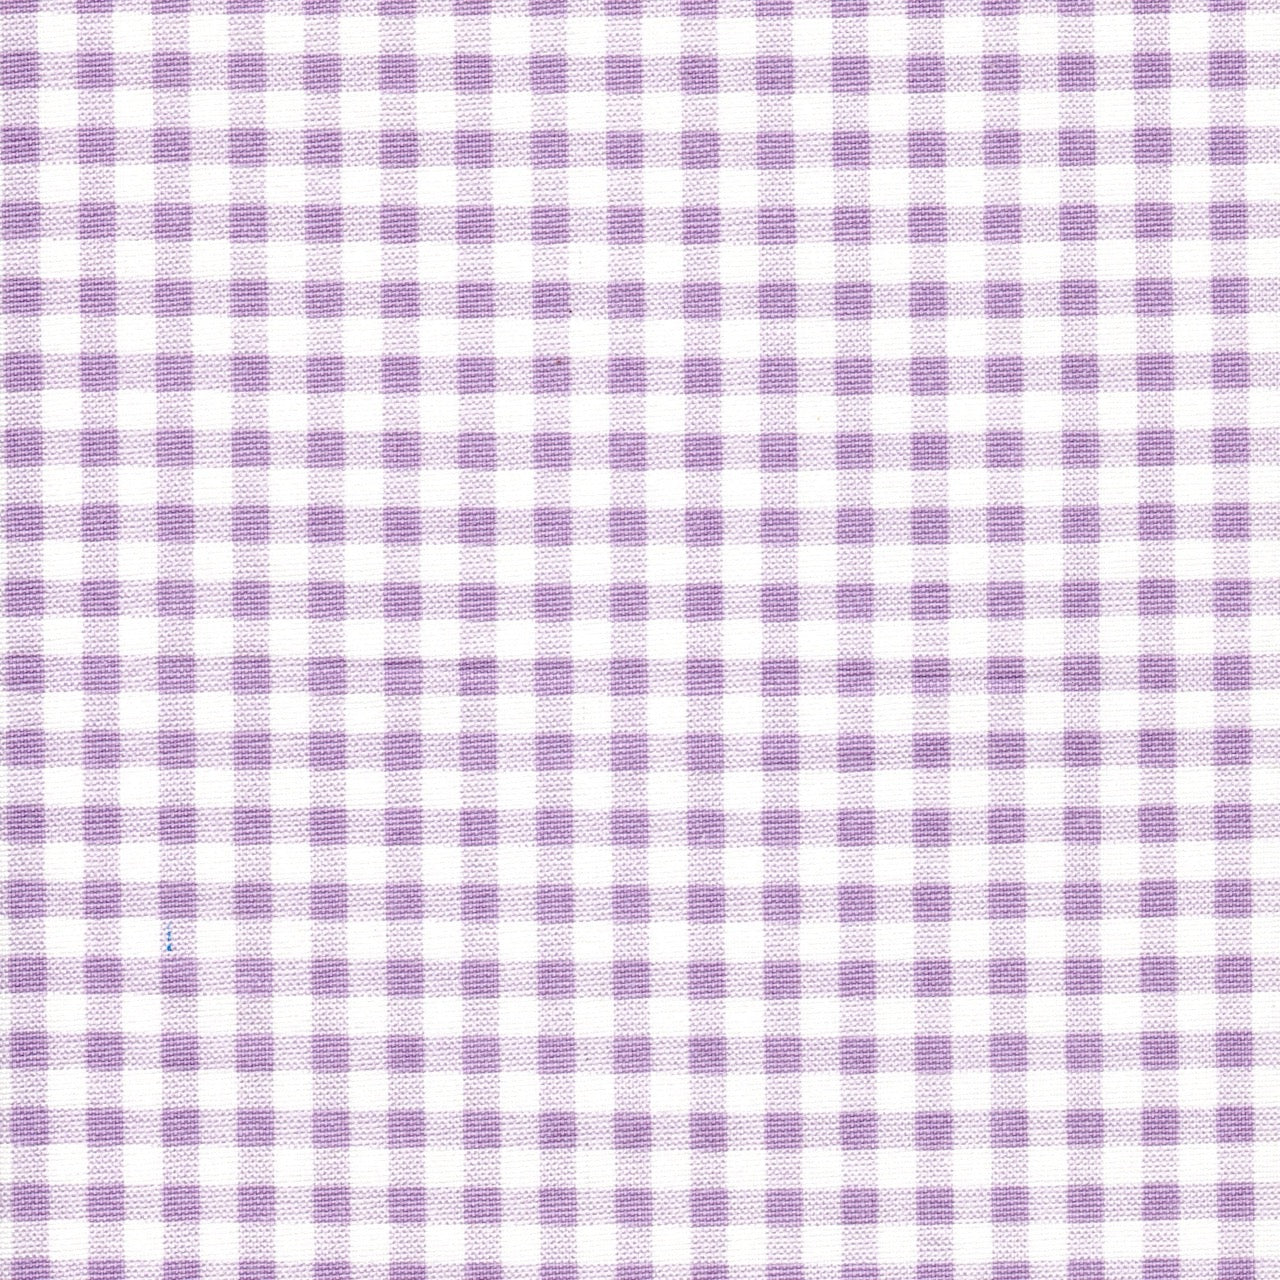 Tailored Valance in Orchid Large Gingham Check on White